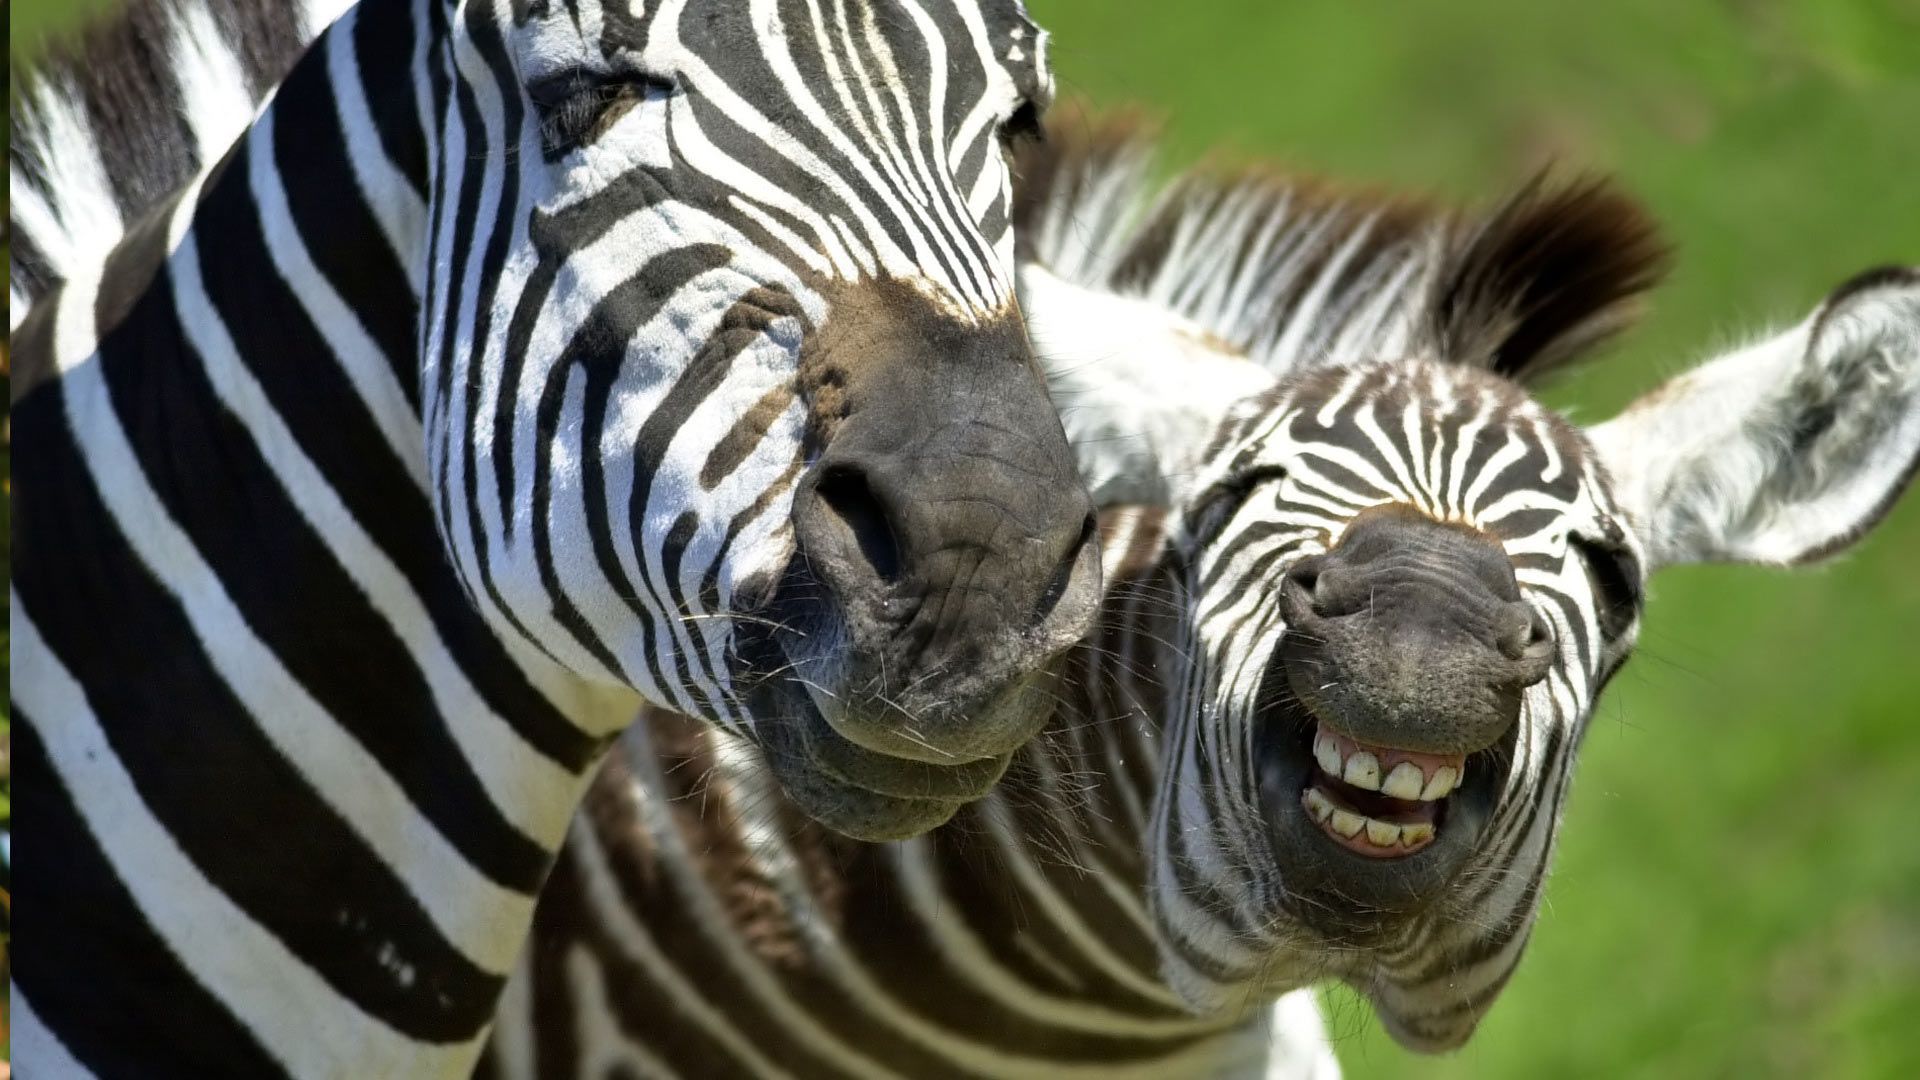 Hd zebra wallpaper How to Make your own #DIY #Samsung #Galaxy S3/ S4/ S5/. Cool picture of animals, Animal wallpaper, Wild animal wallpaper